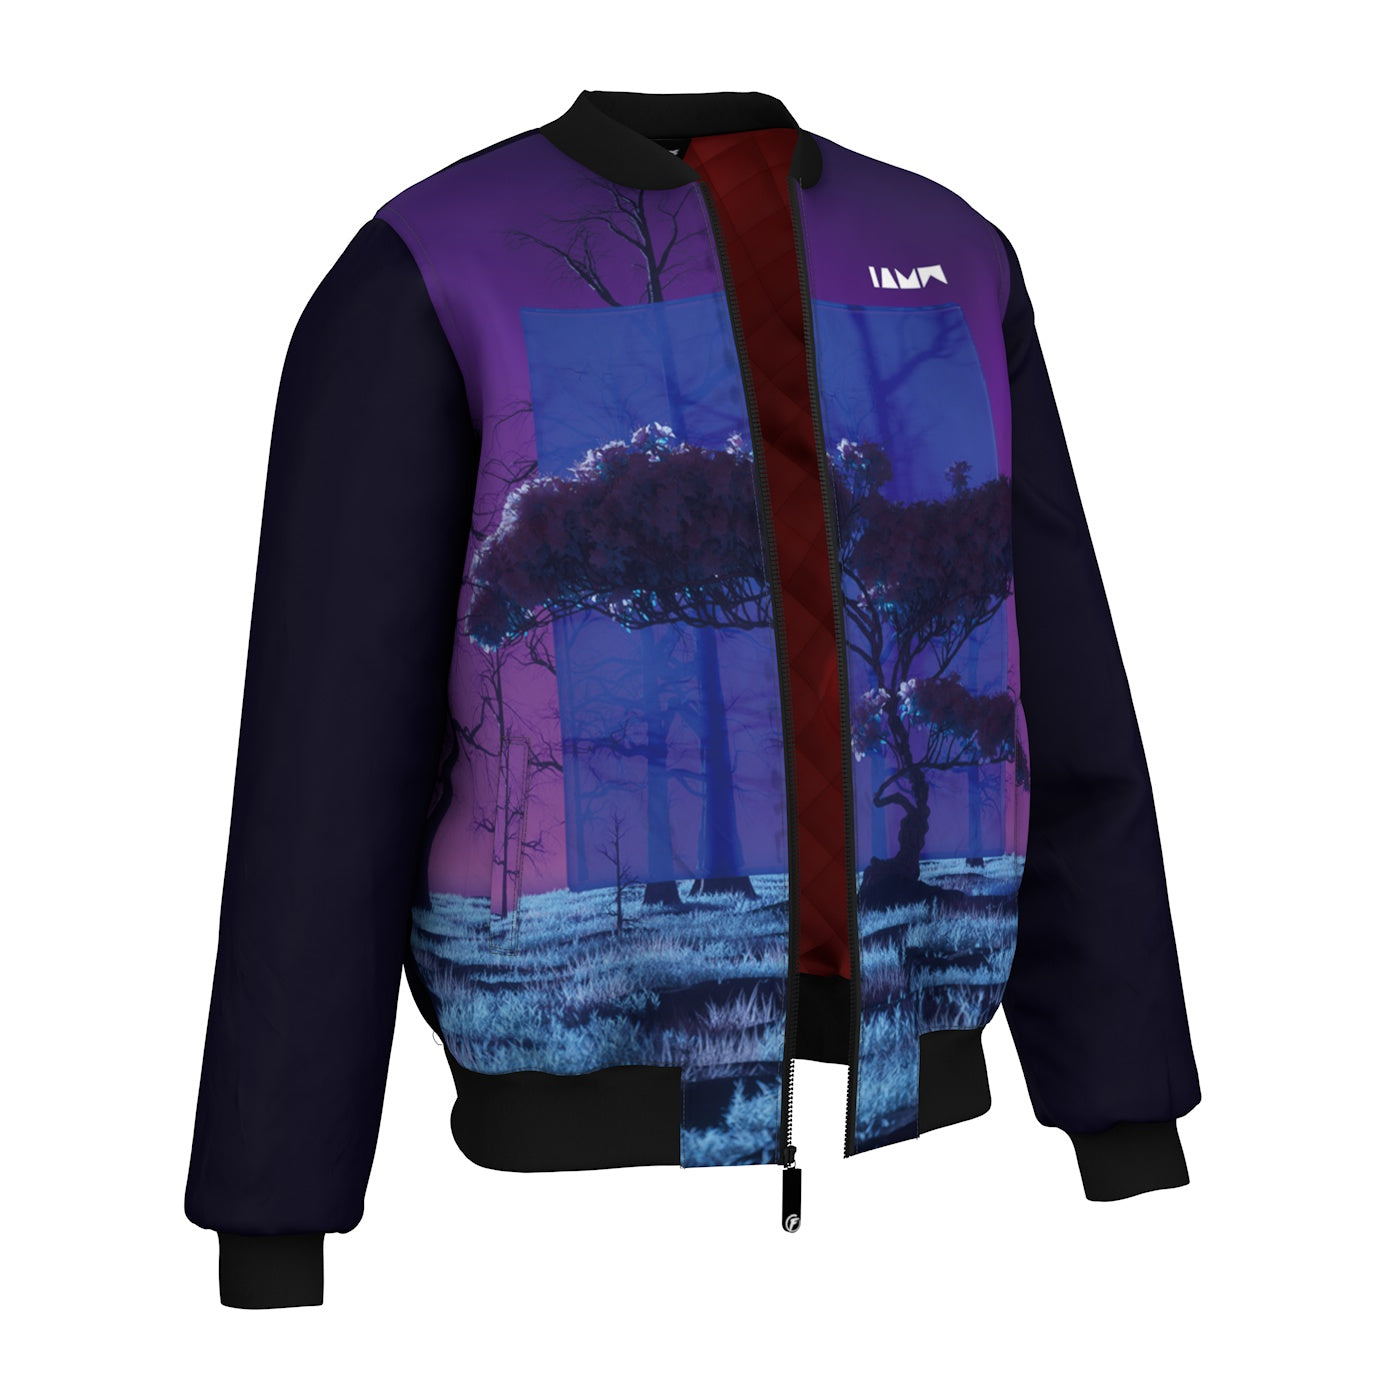 The Unknown Bomber Jacket